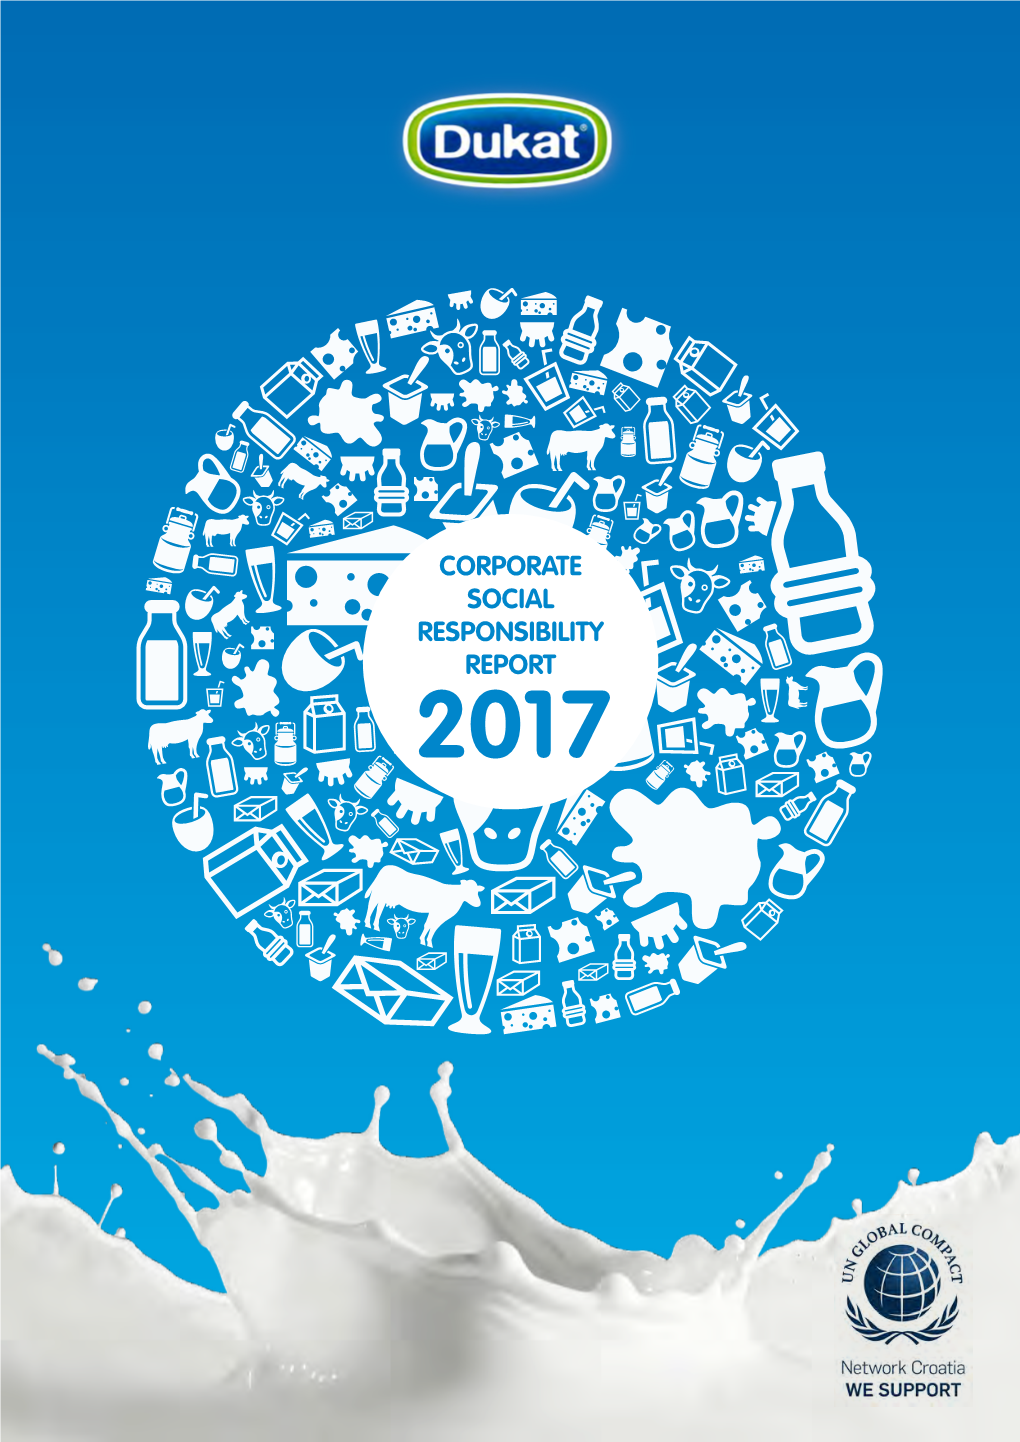 CORPORATE SOCIAL RESPONSIBILITY REPORT 2017 Statement of Continued Support and Business Challenges